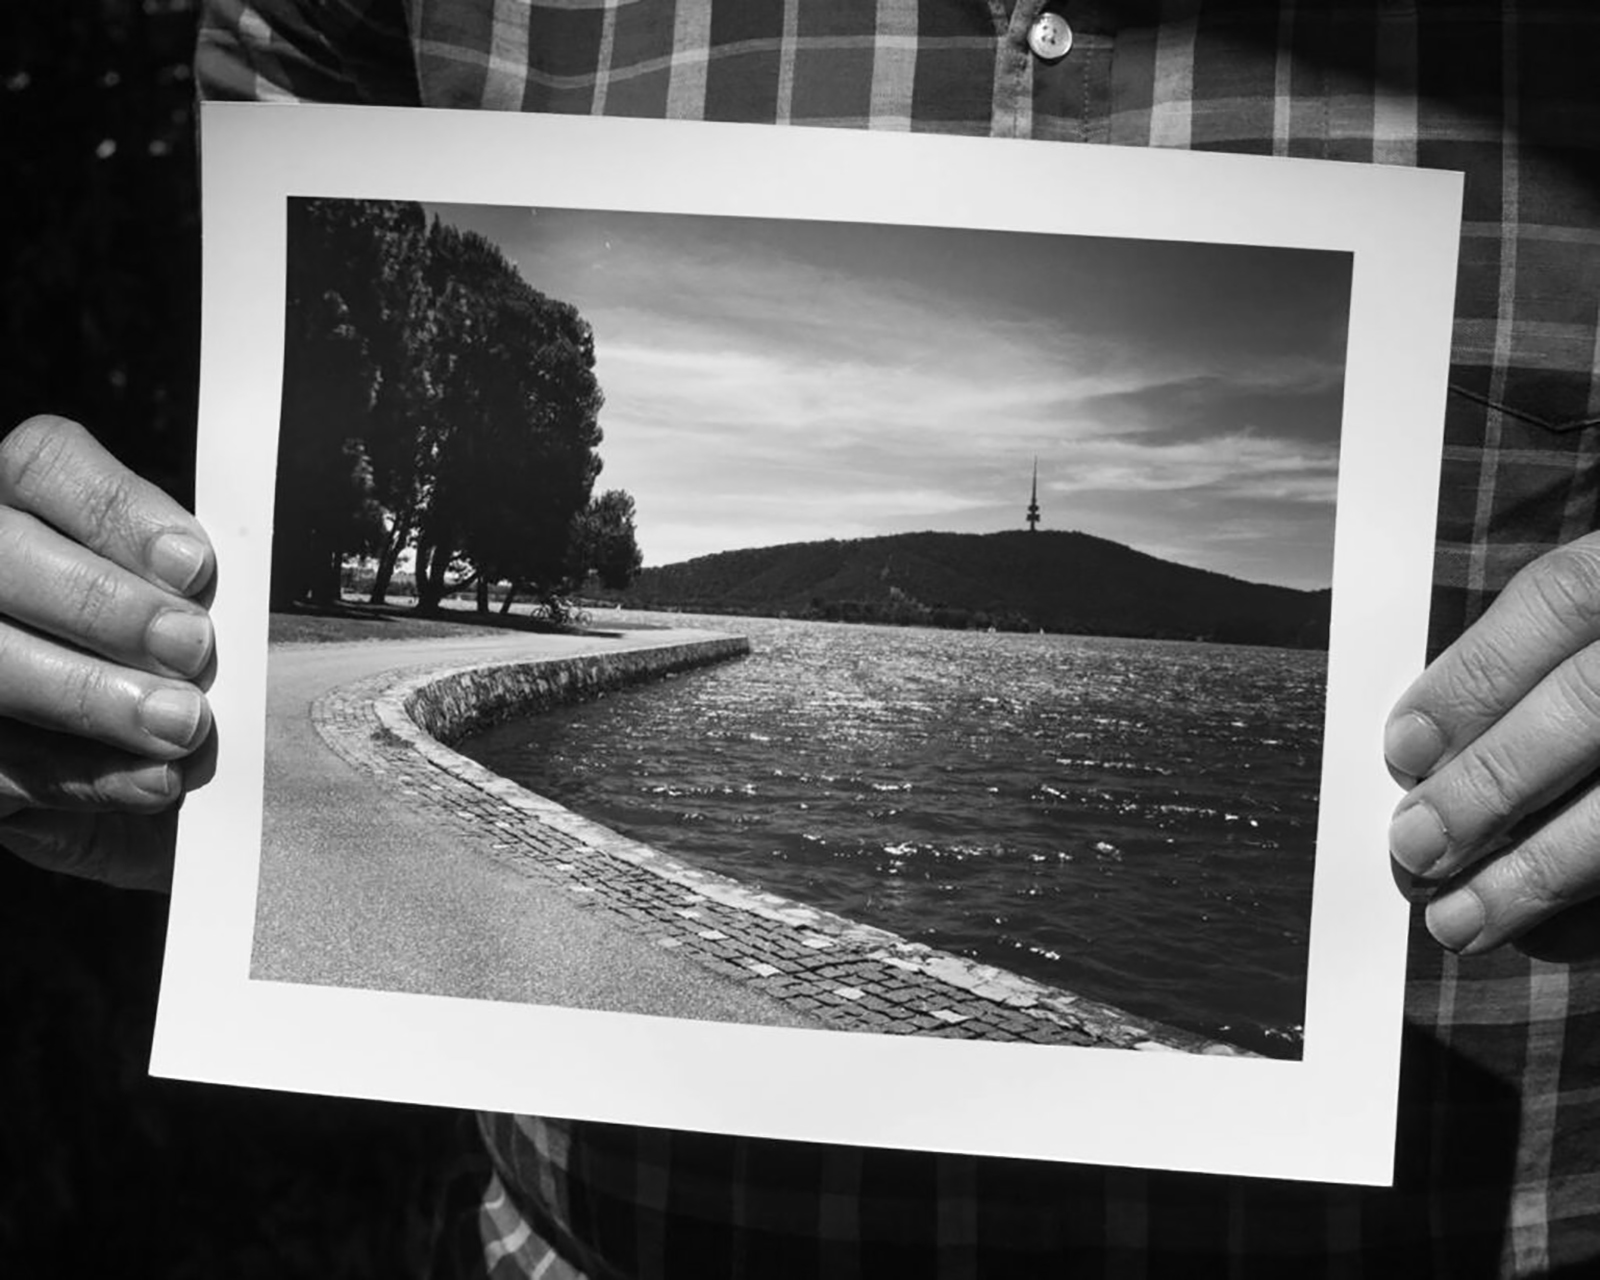 An image of hands holding up a black and white photograph of Lake Burley Griffin in Canberra